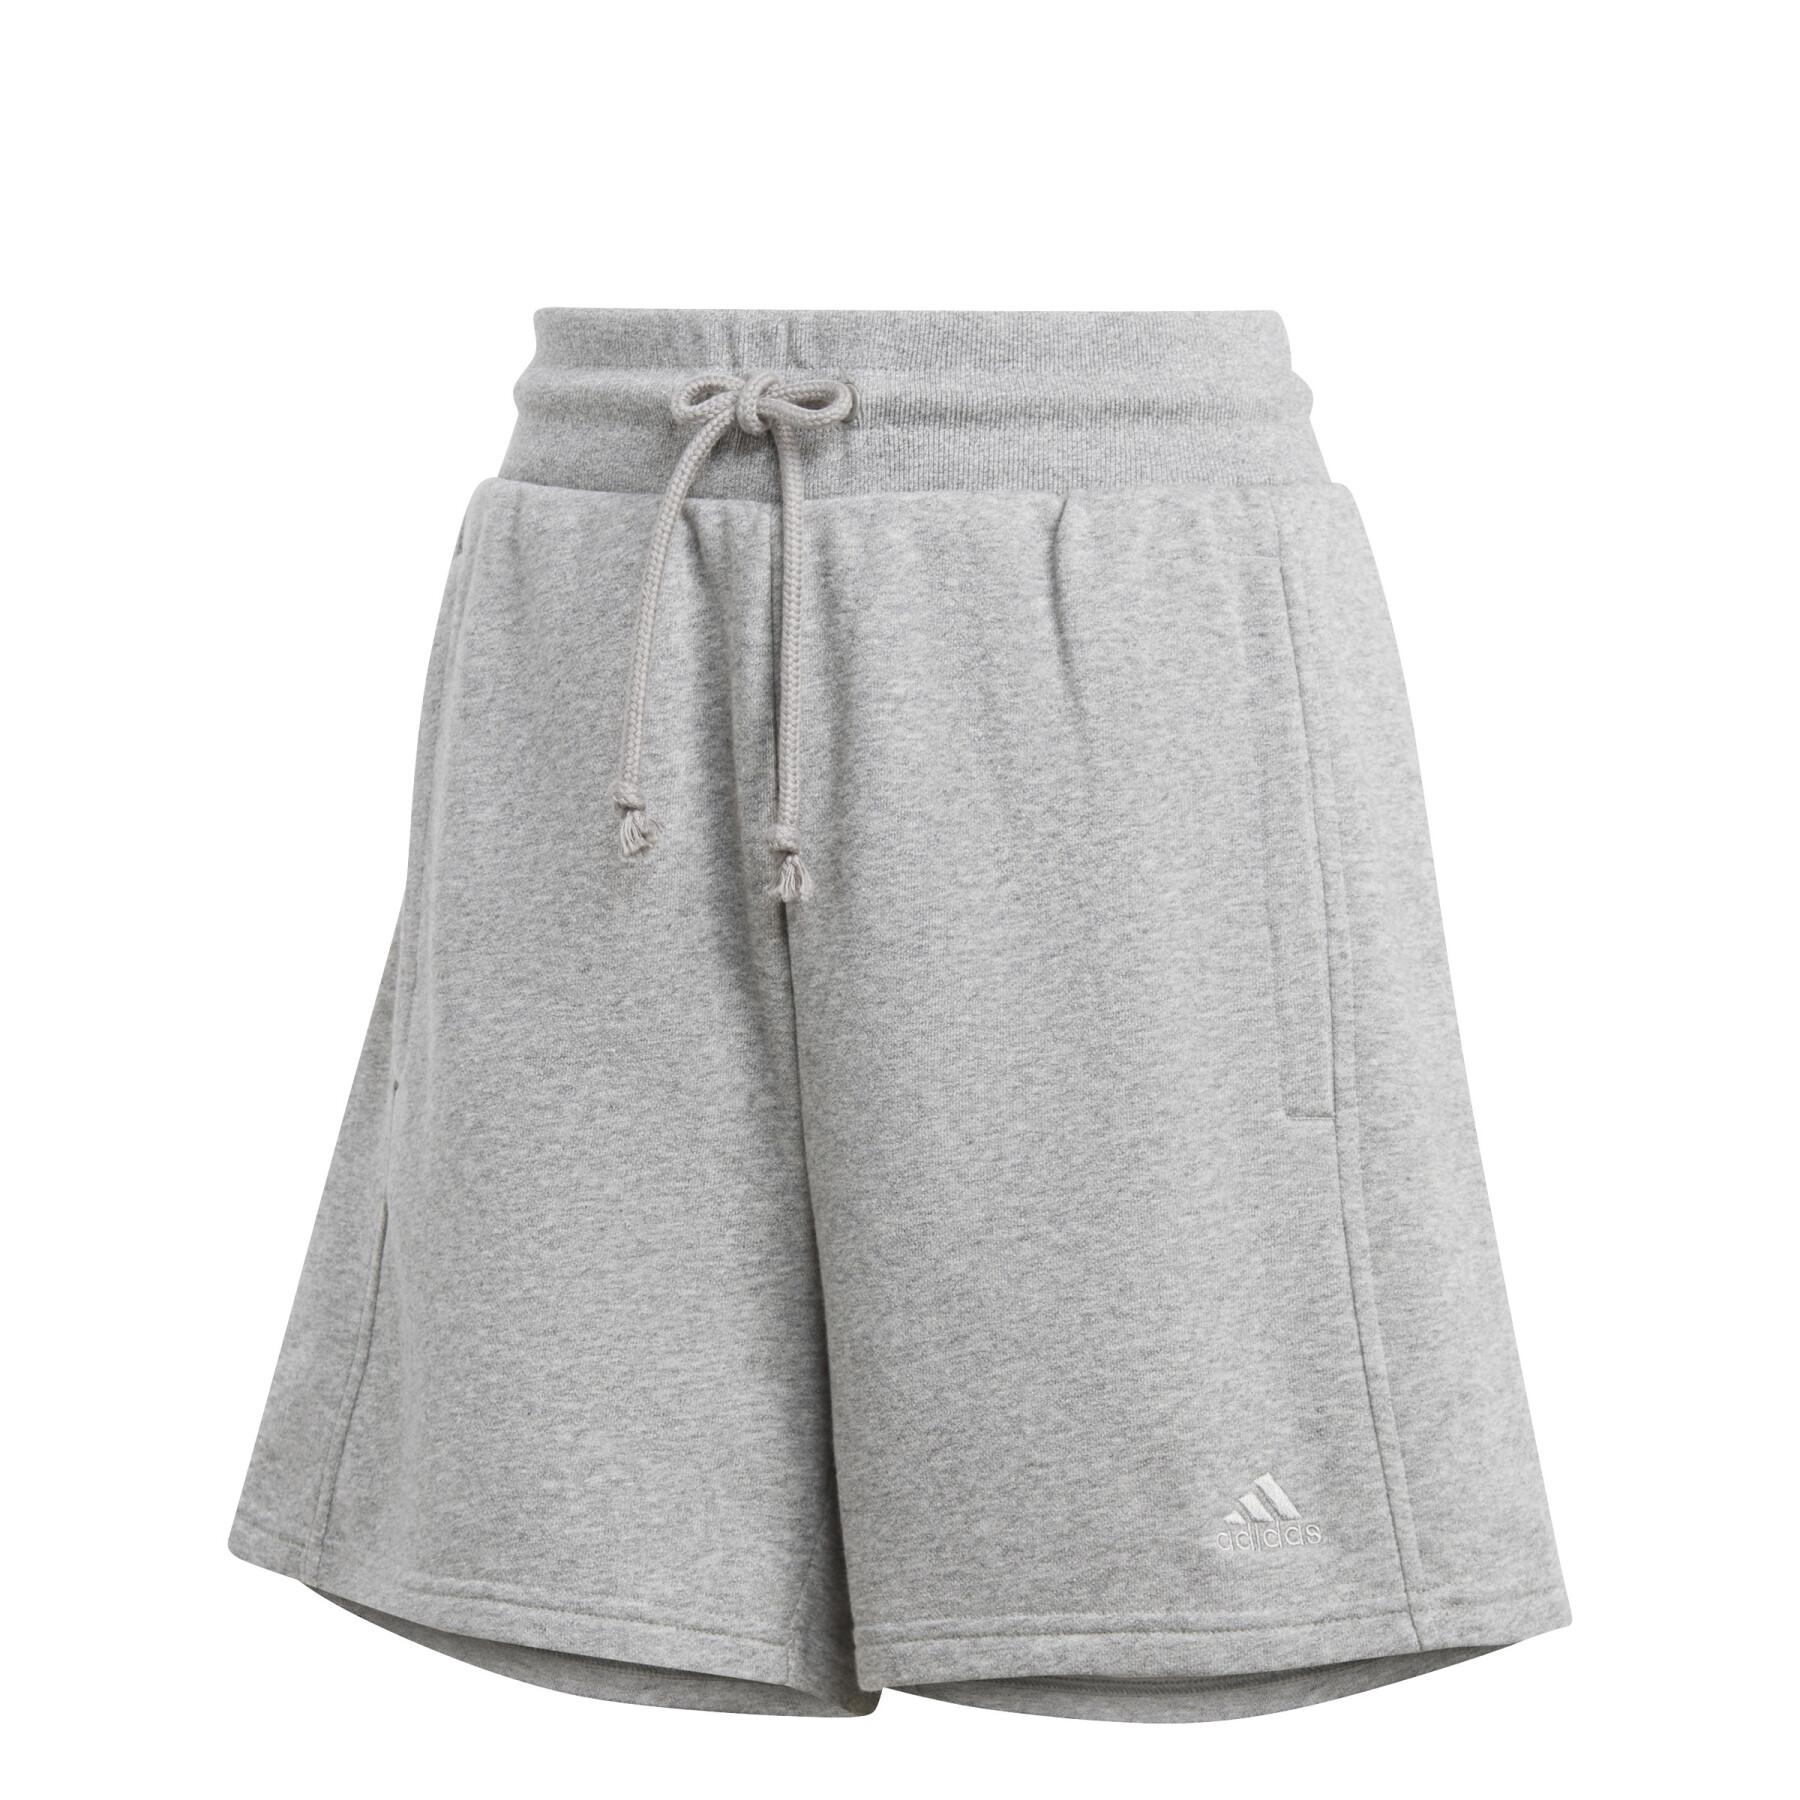 Women's shorts adidas All SZN French Terry